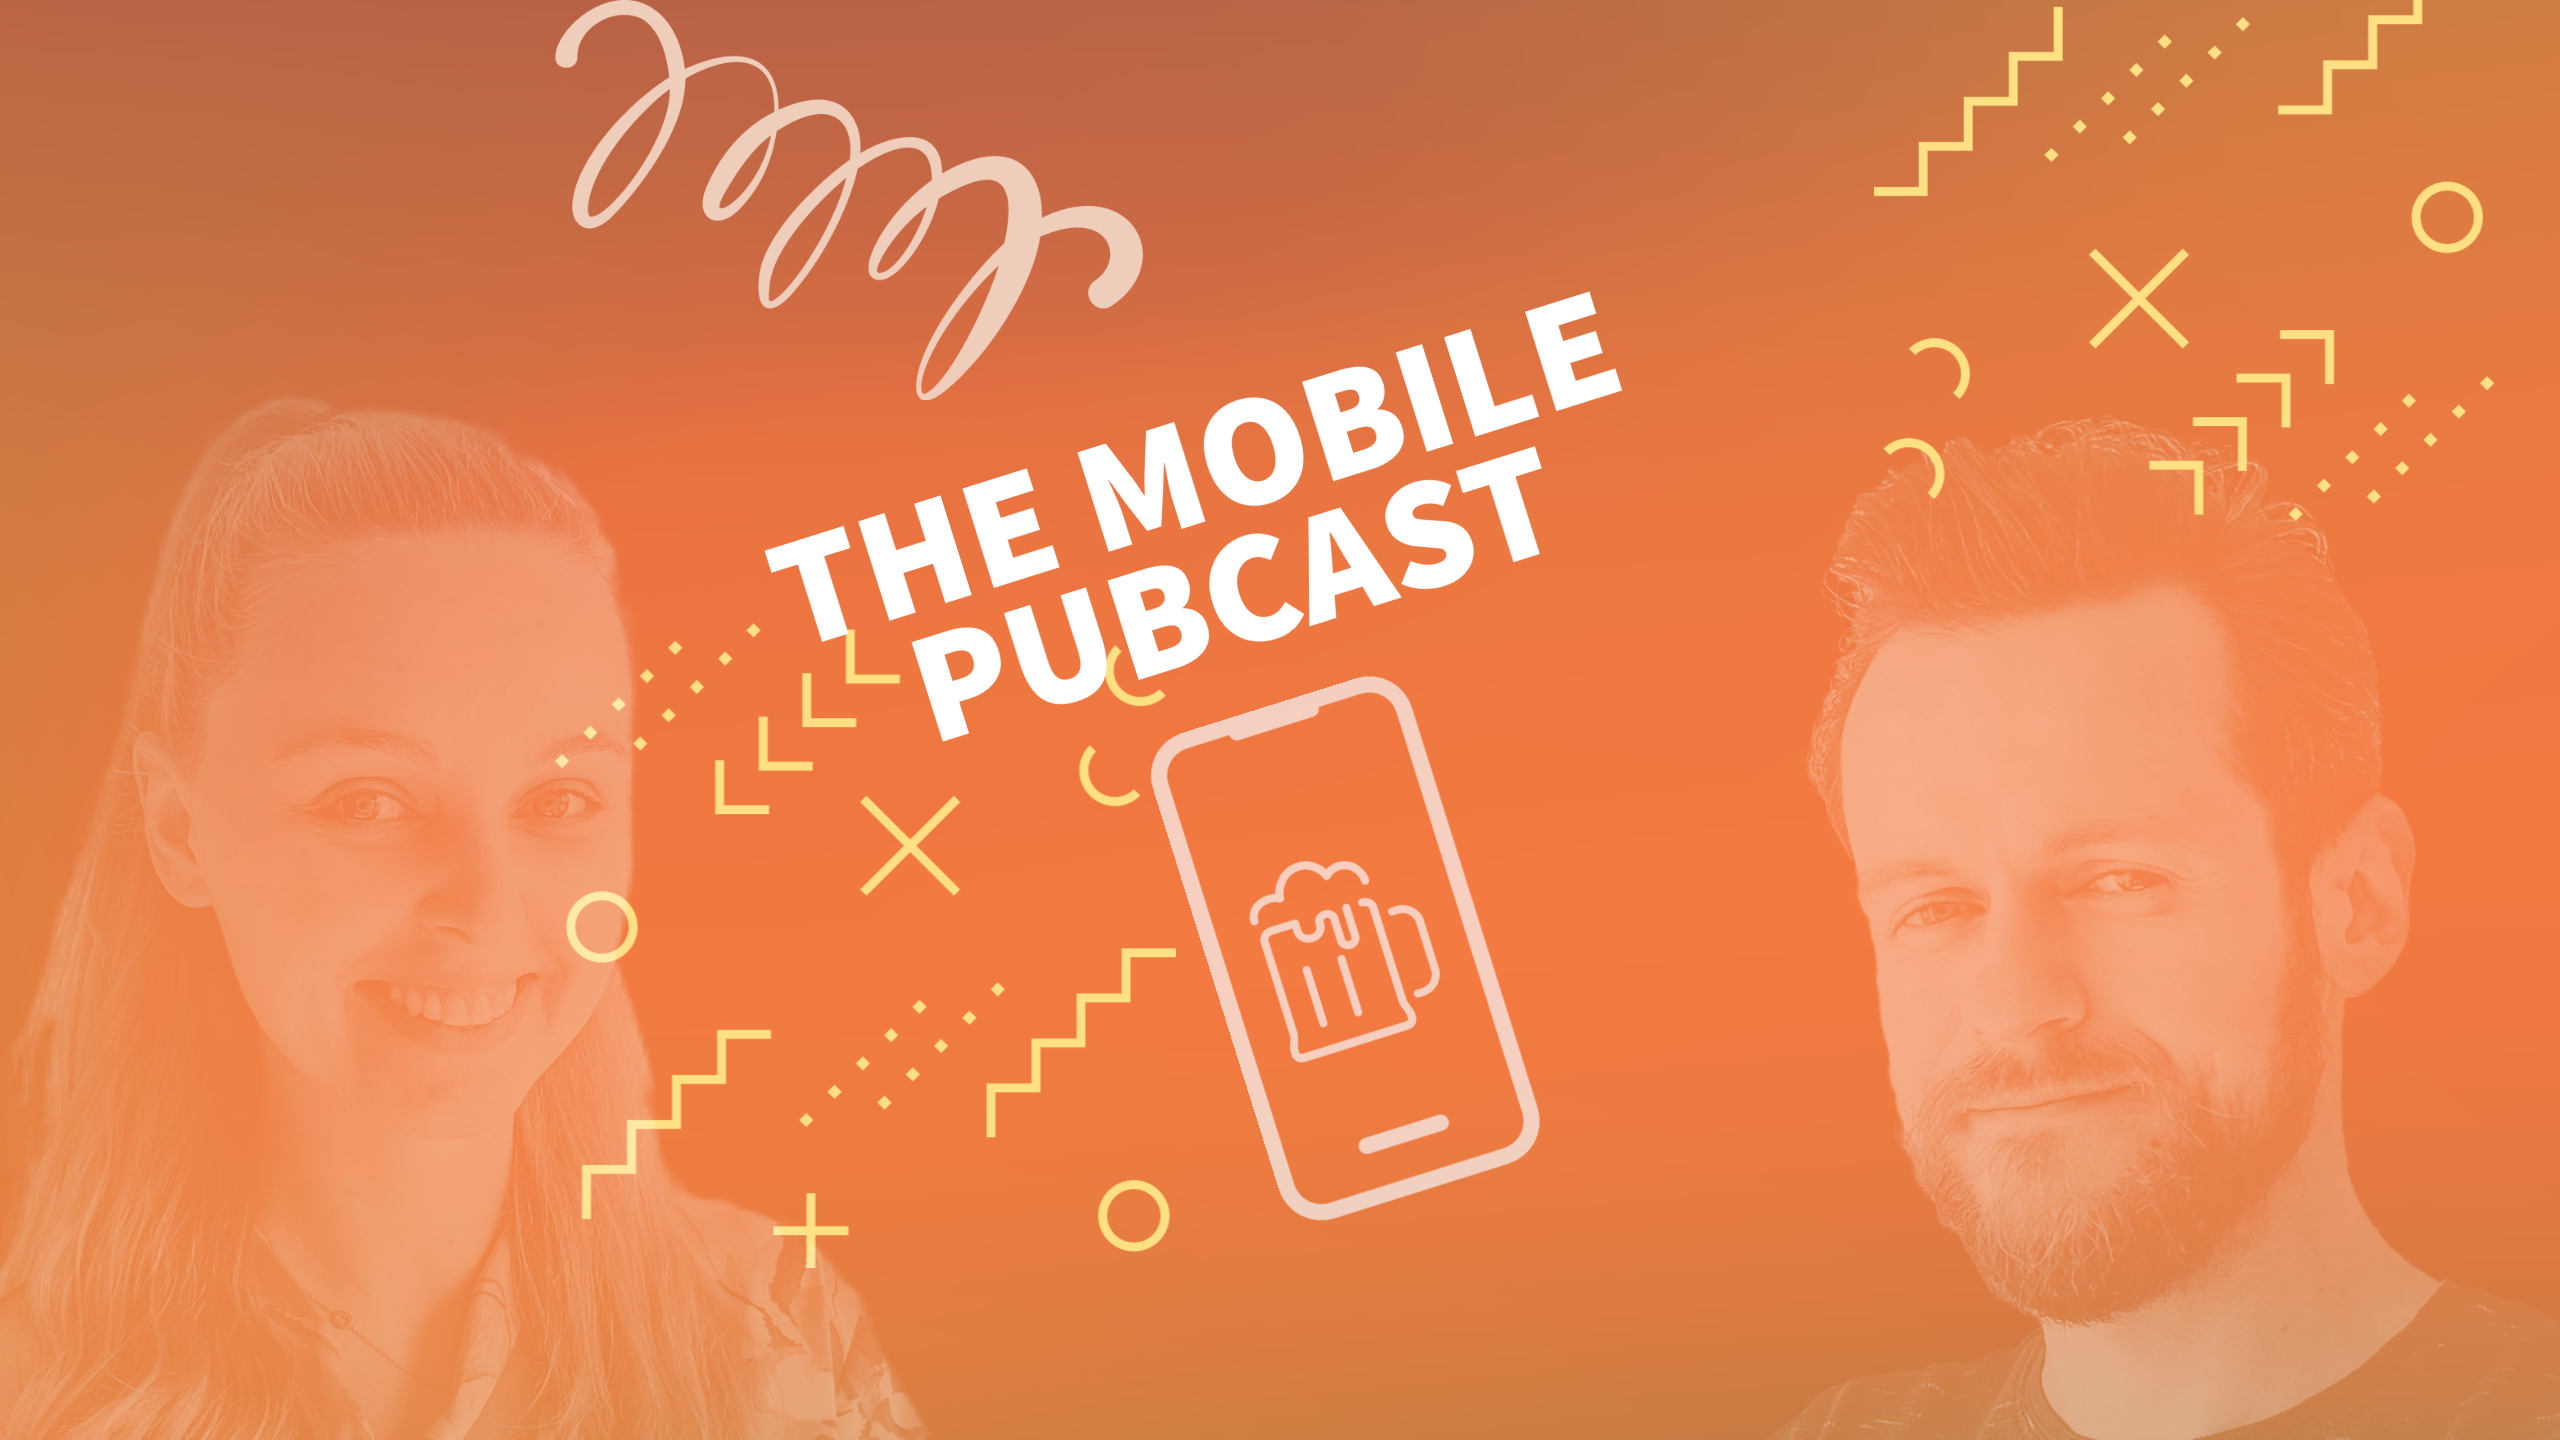 The Mobile Pubcast – our space for a friendly chat about mobile business